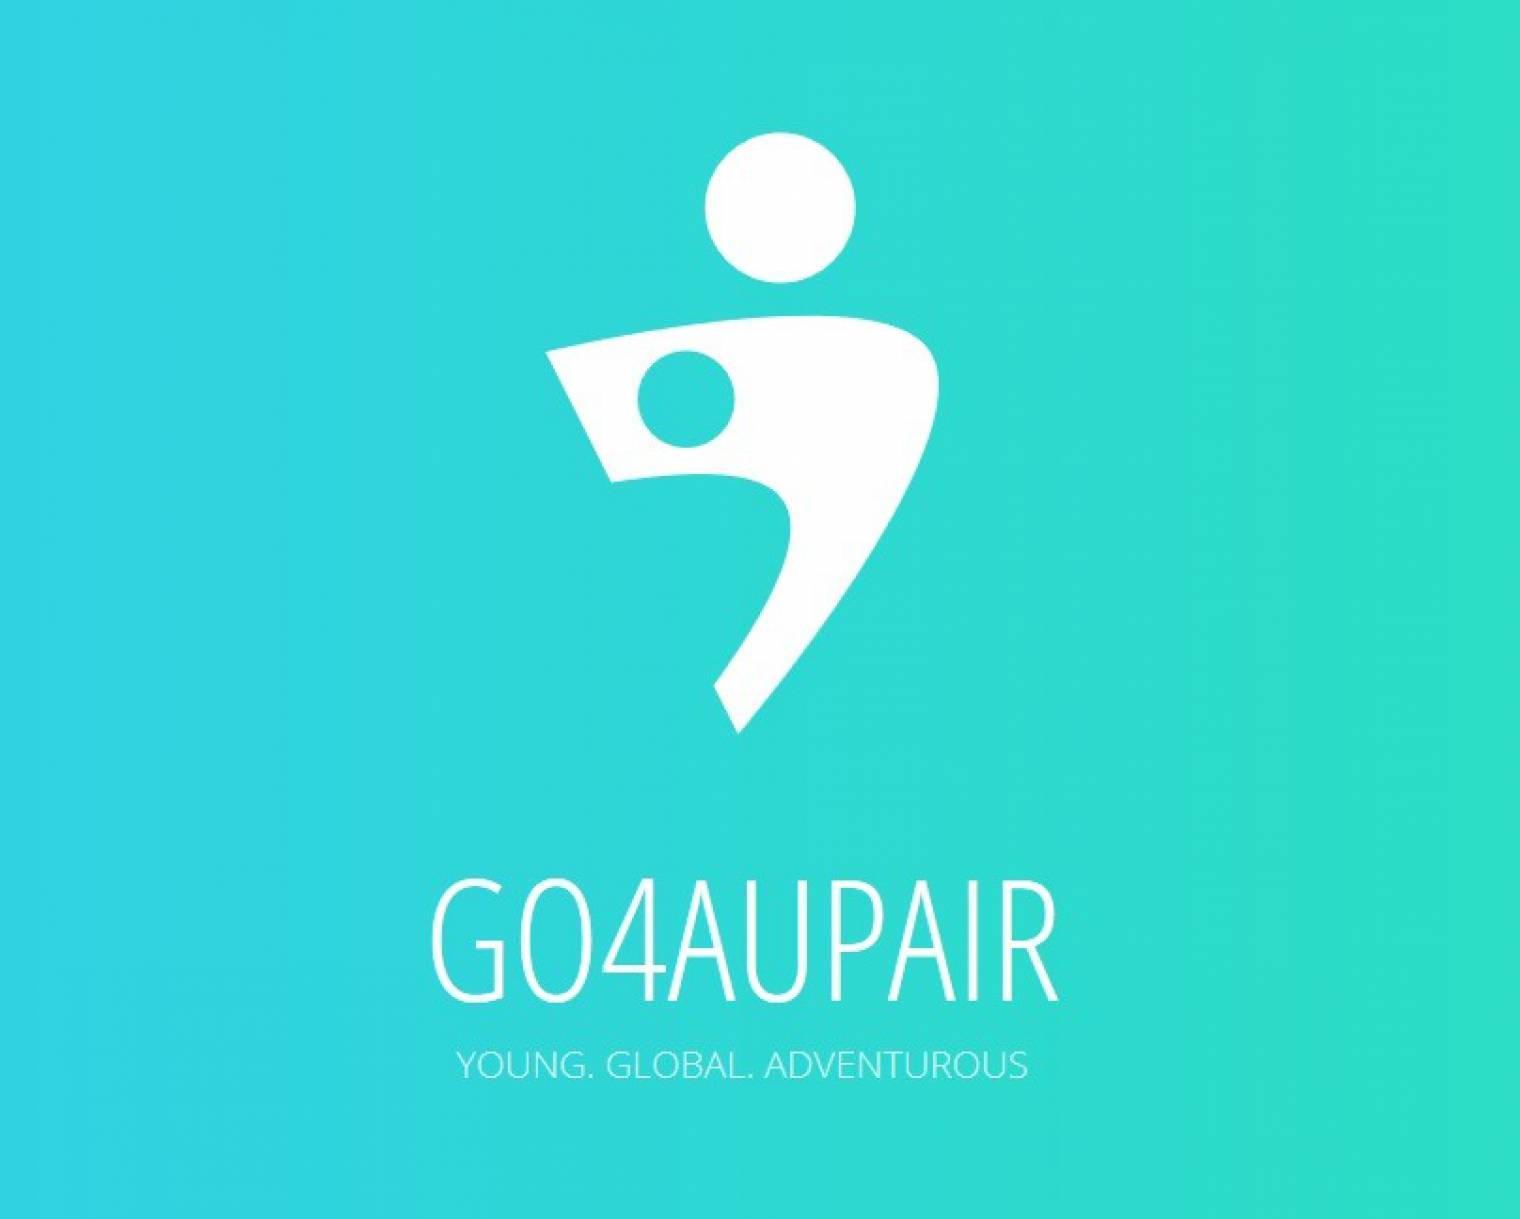 We welcome our new Affiliate Member Go4Aupair, Germany